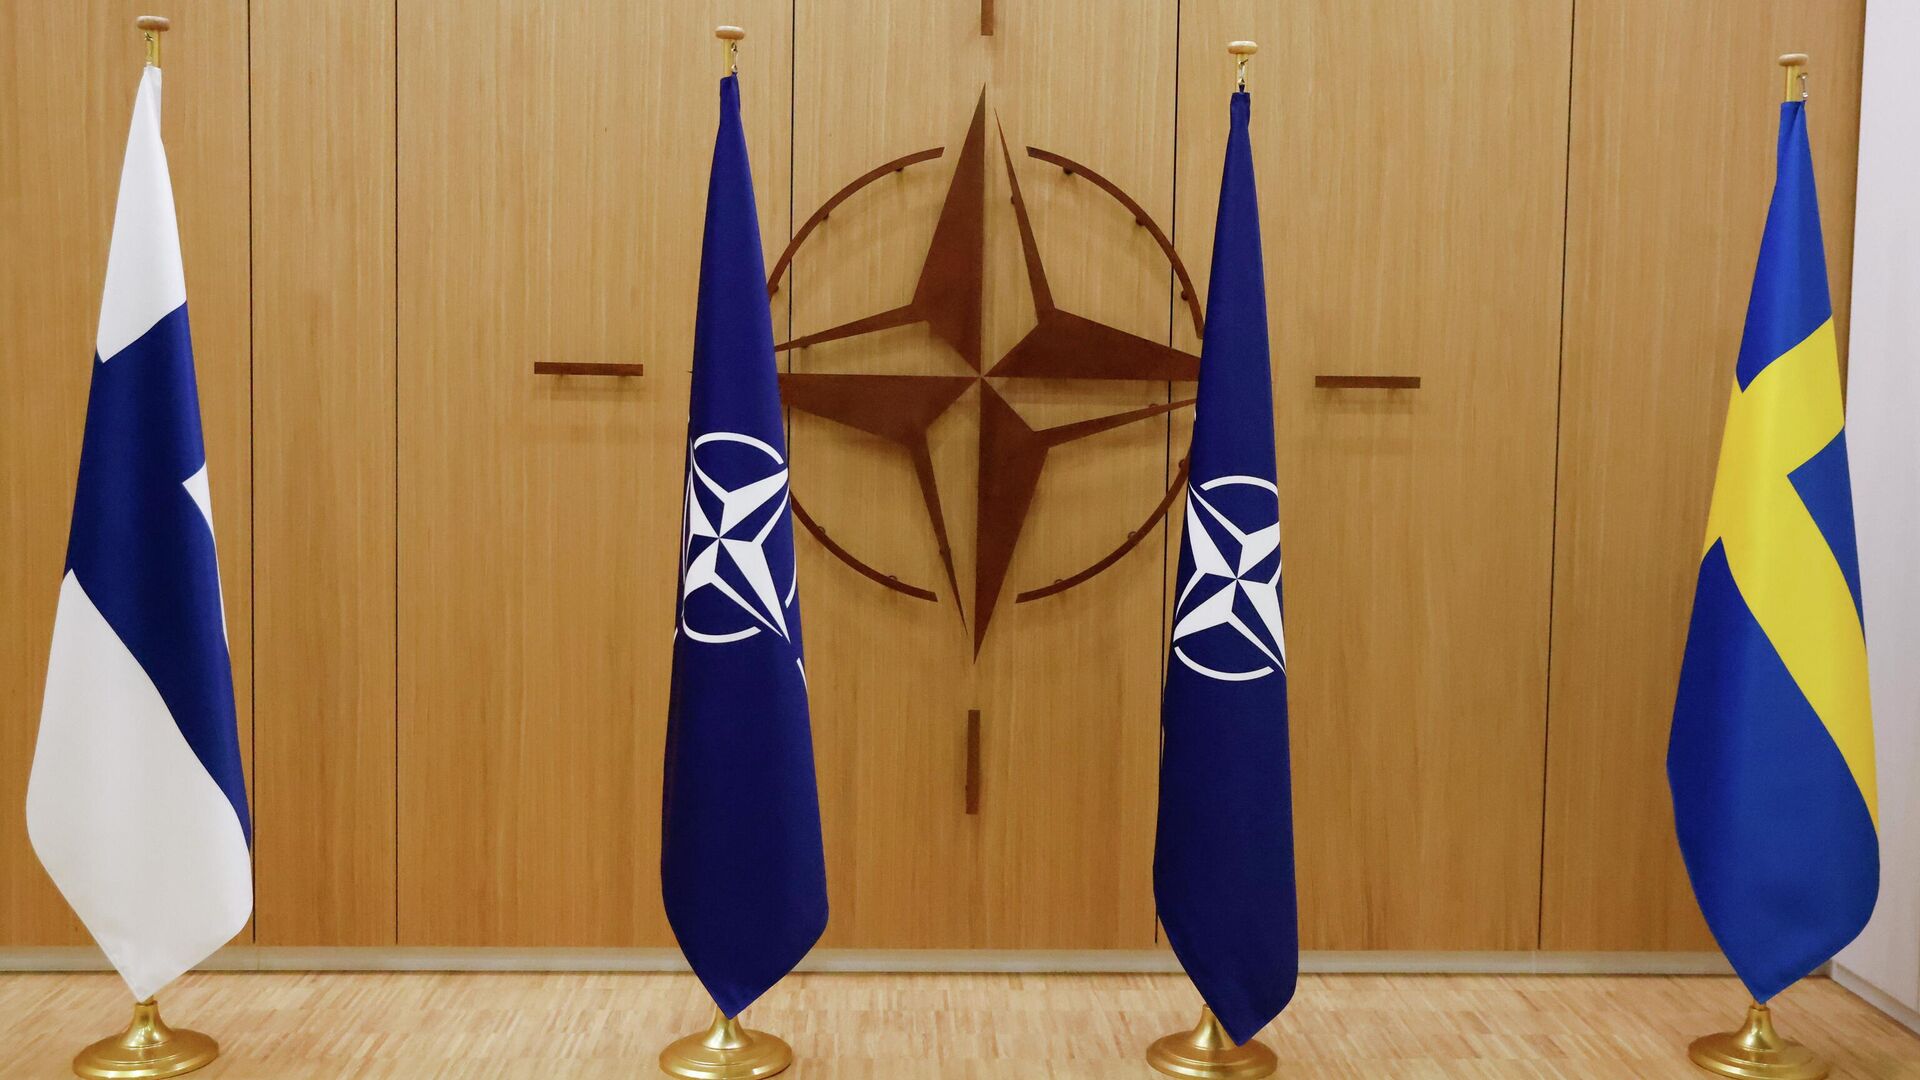 Flags of Finland, left, NATO and Sweden, right, are displayed during a ceremony to mark Sweden's and Finland's application for membership in Brussels, Belgium, Wednesday May 18, 2022. NATO Secretary-General Jens Stoltenberg said that the military alliance stands ready to seize a historic moment and move quickly on allowing Finland and Sweden to join its ranks, after the two countries submitted their membership requests. (Johanna Geron/Pool via AP) - اسپوتنیک افغانستان  , 1920, 21.10.2023